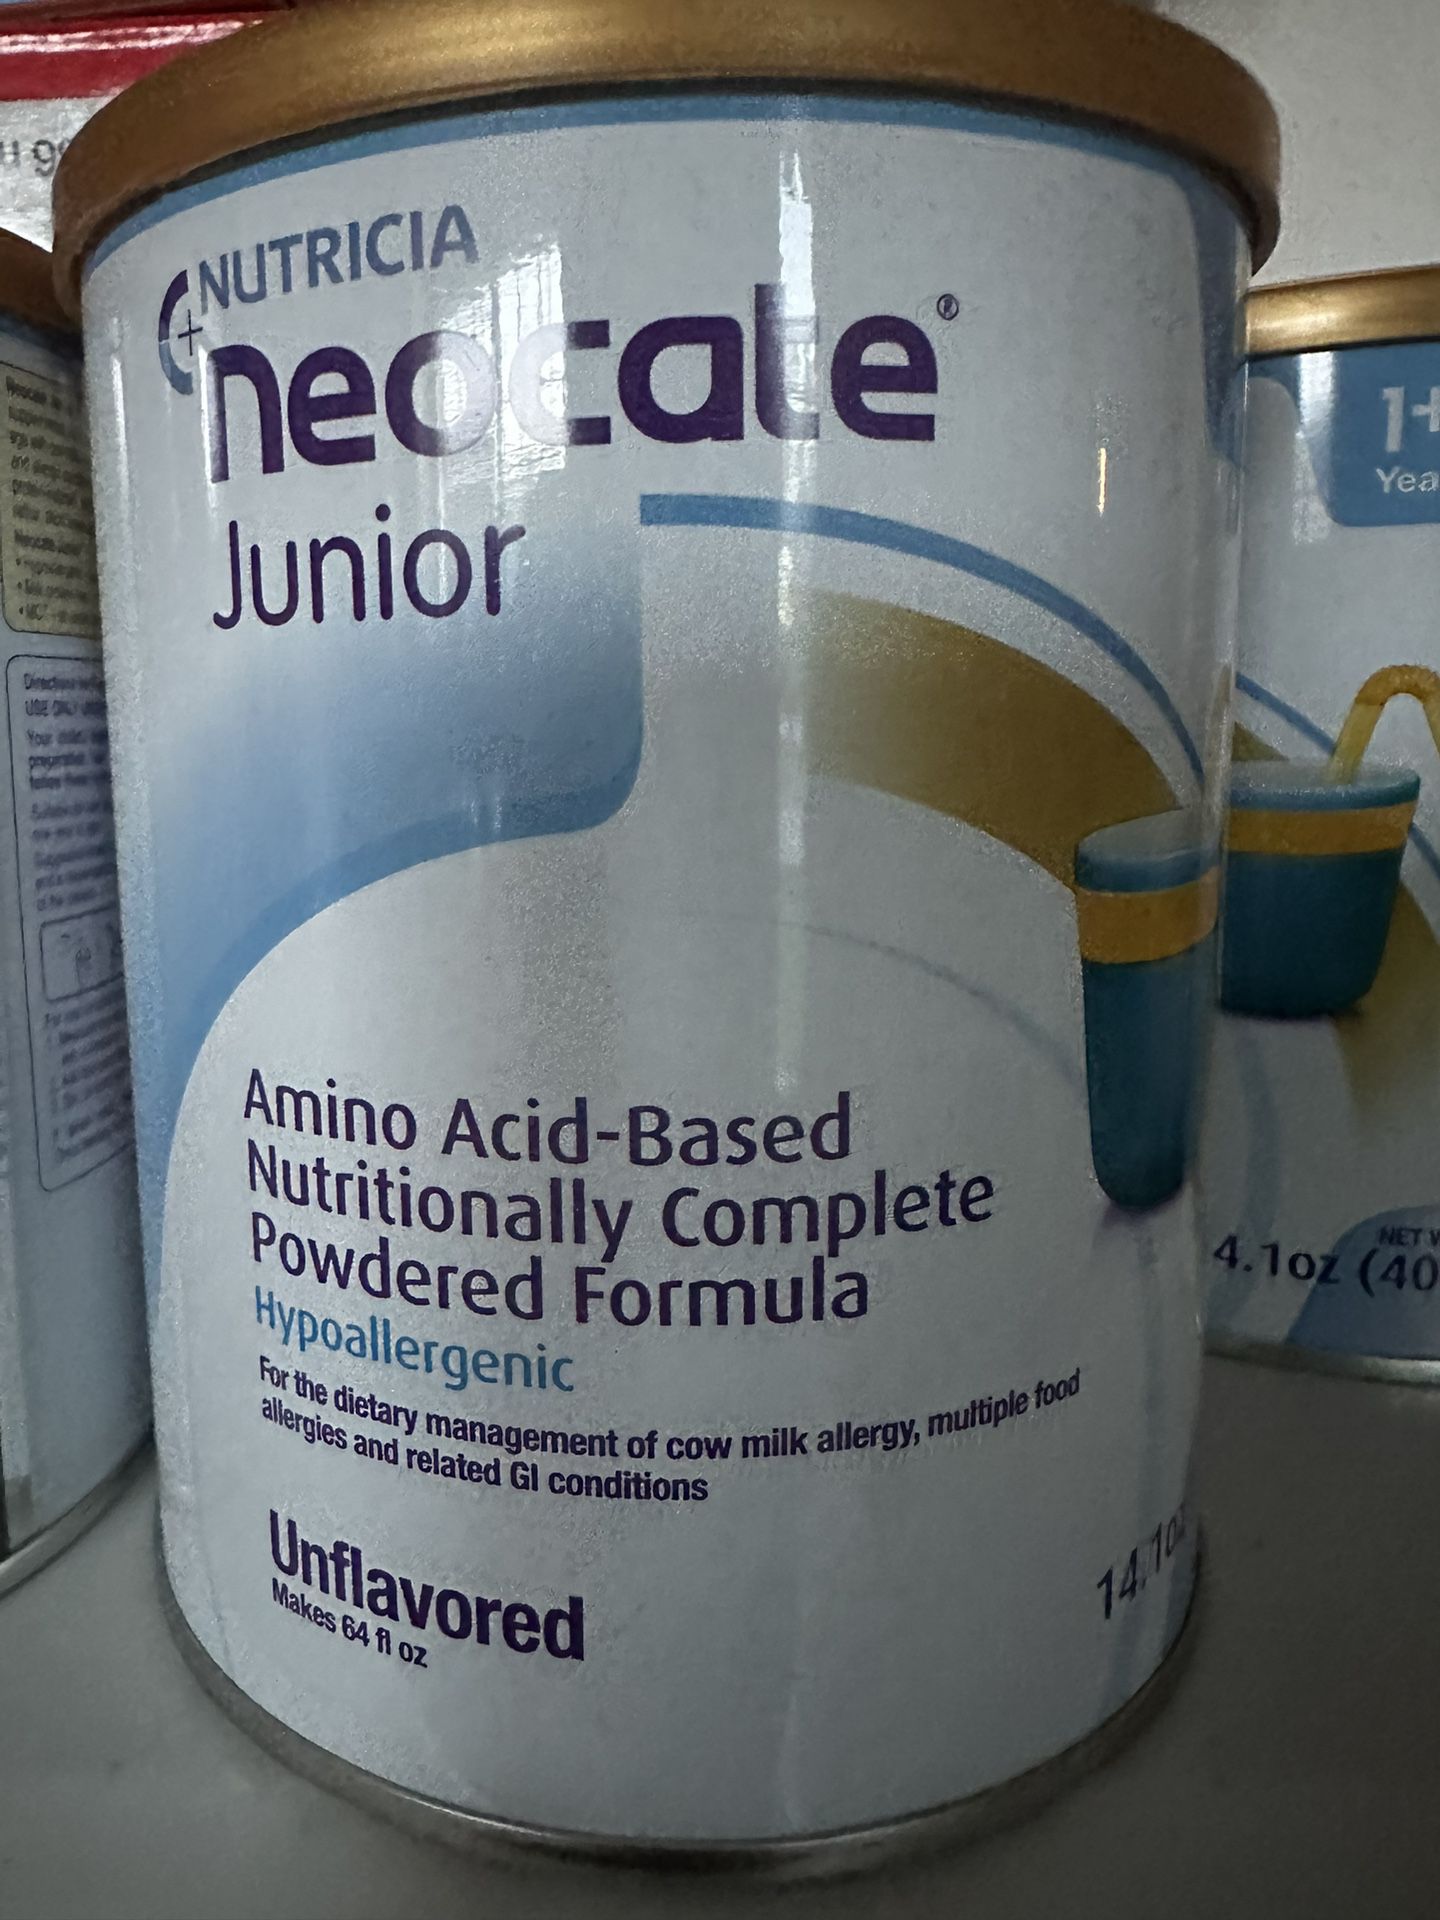 4 Case Neocate Junior Unflavored (16can)